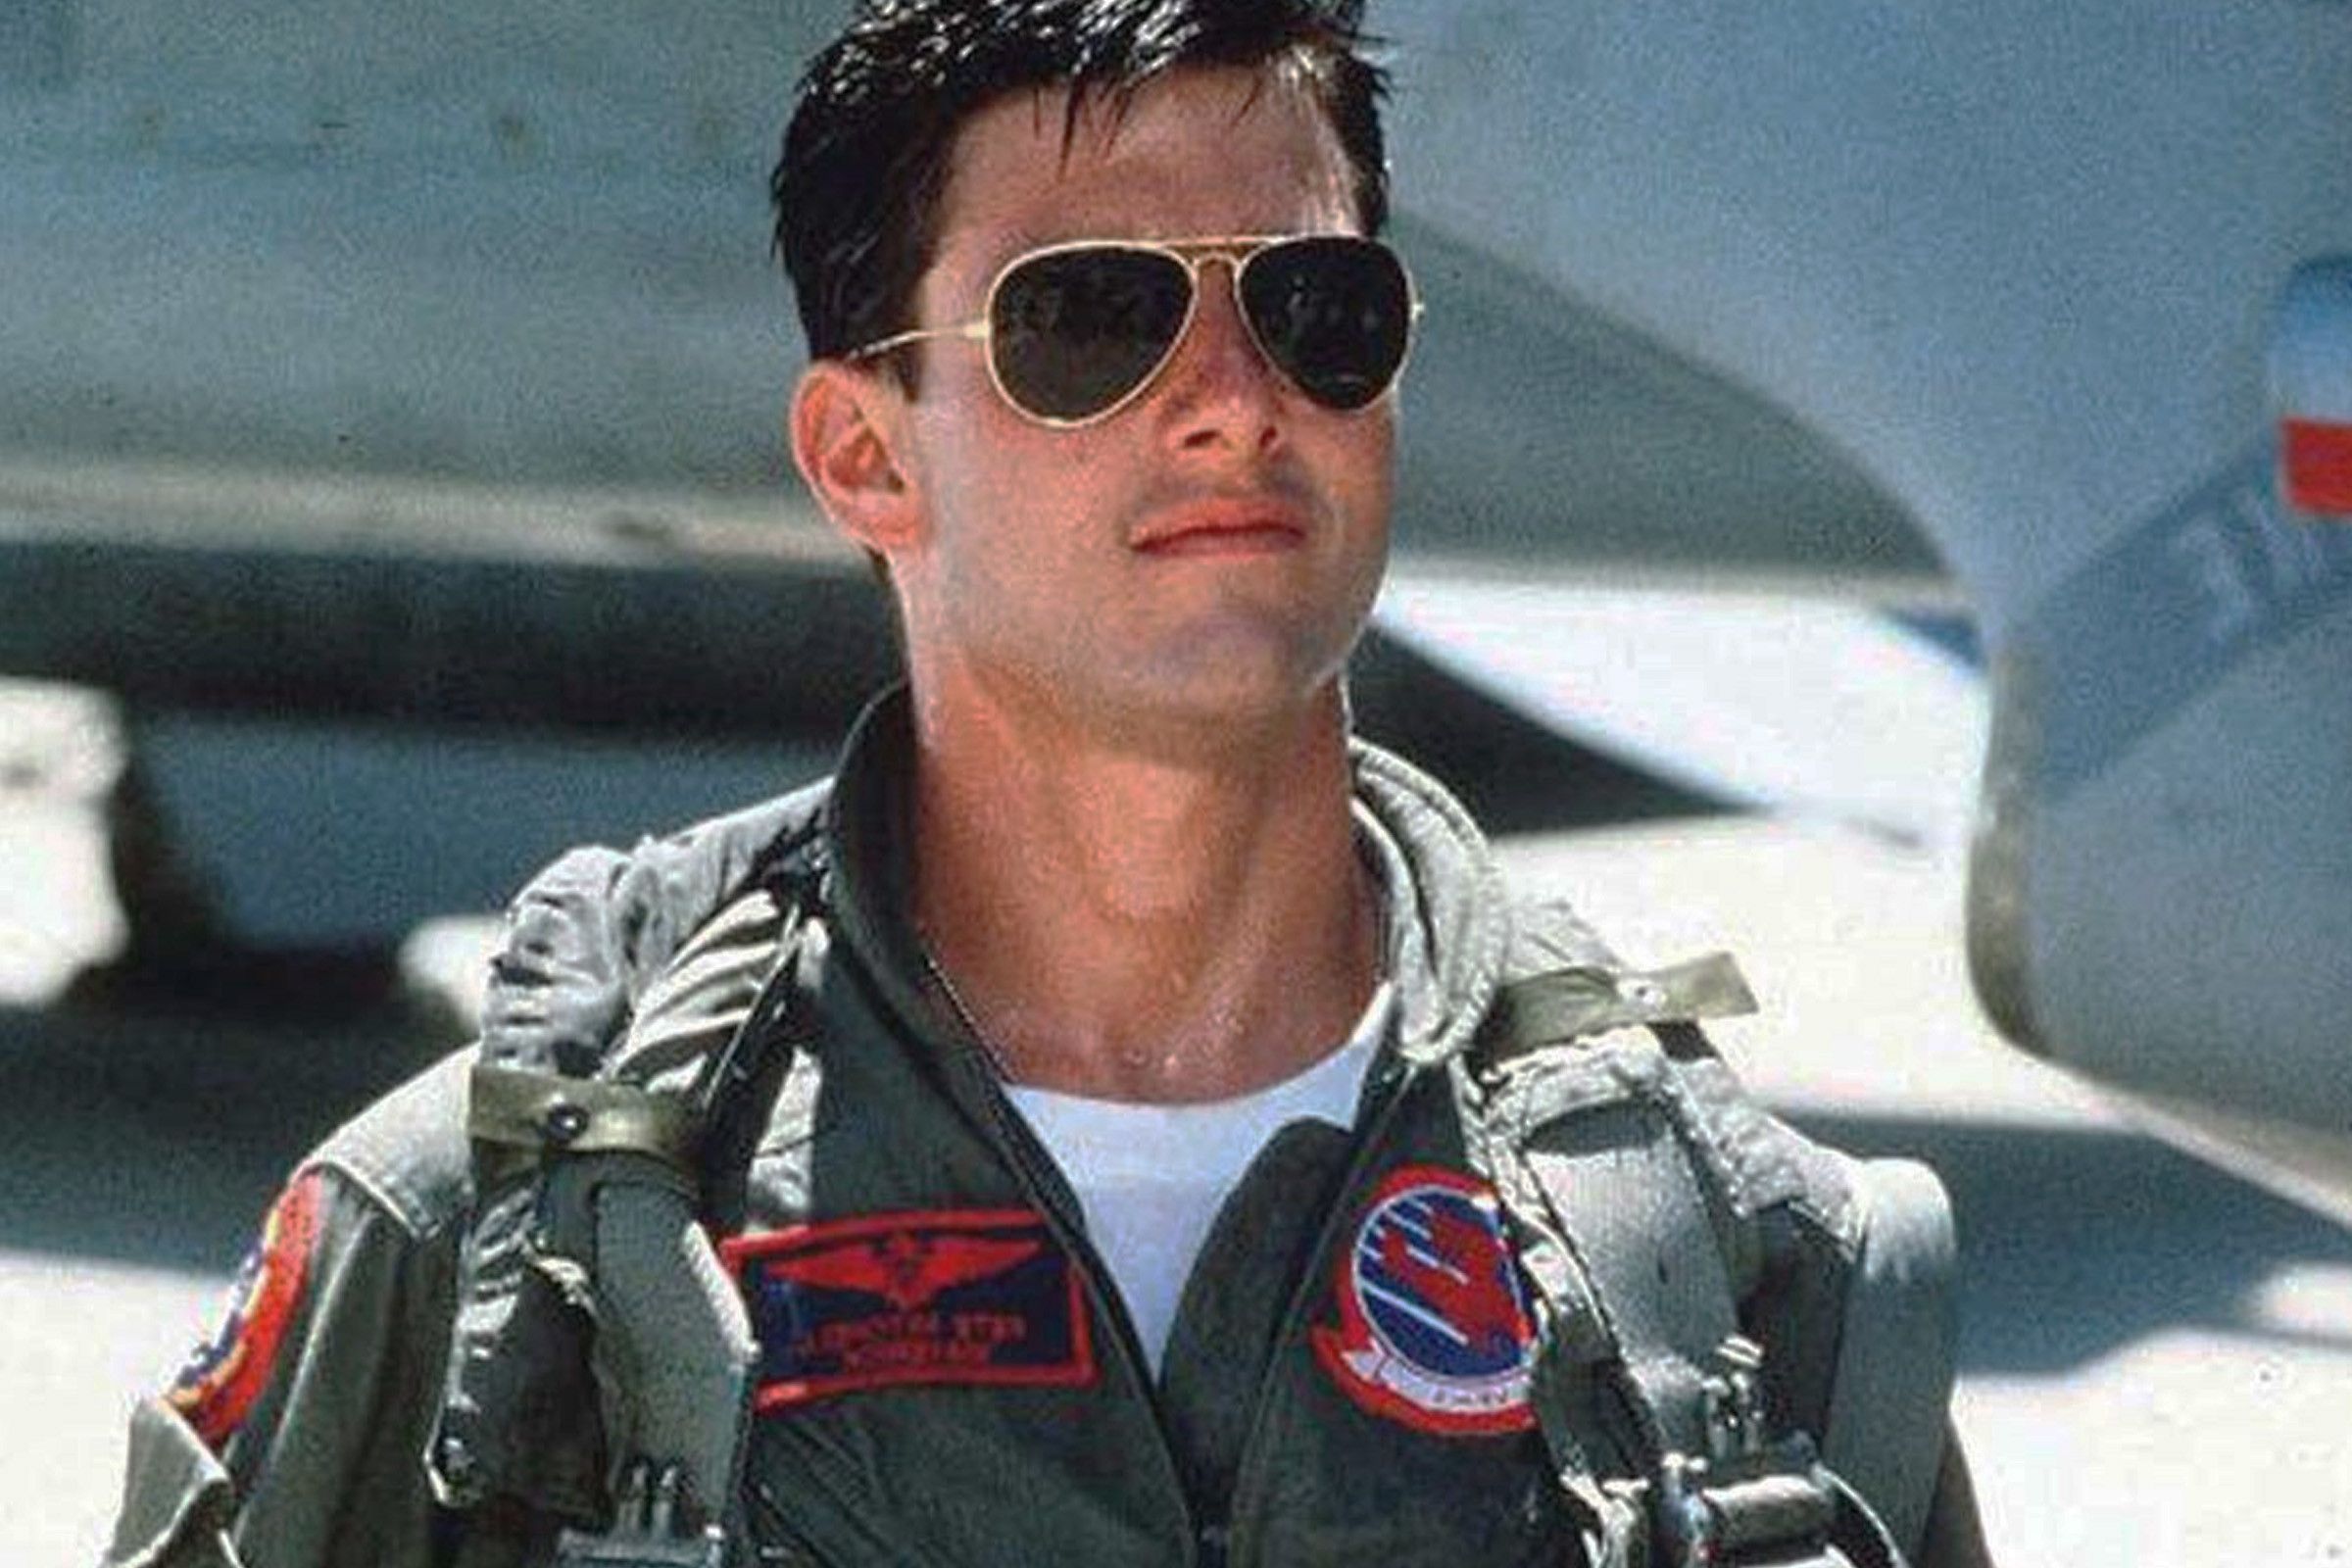 Aviator Shades: Tom Cruise, “Top Gun” and the Rise of the Military Entertainment Complex